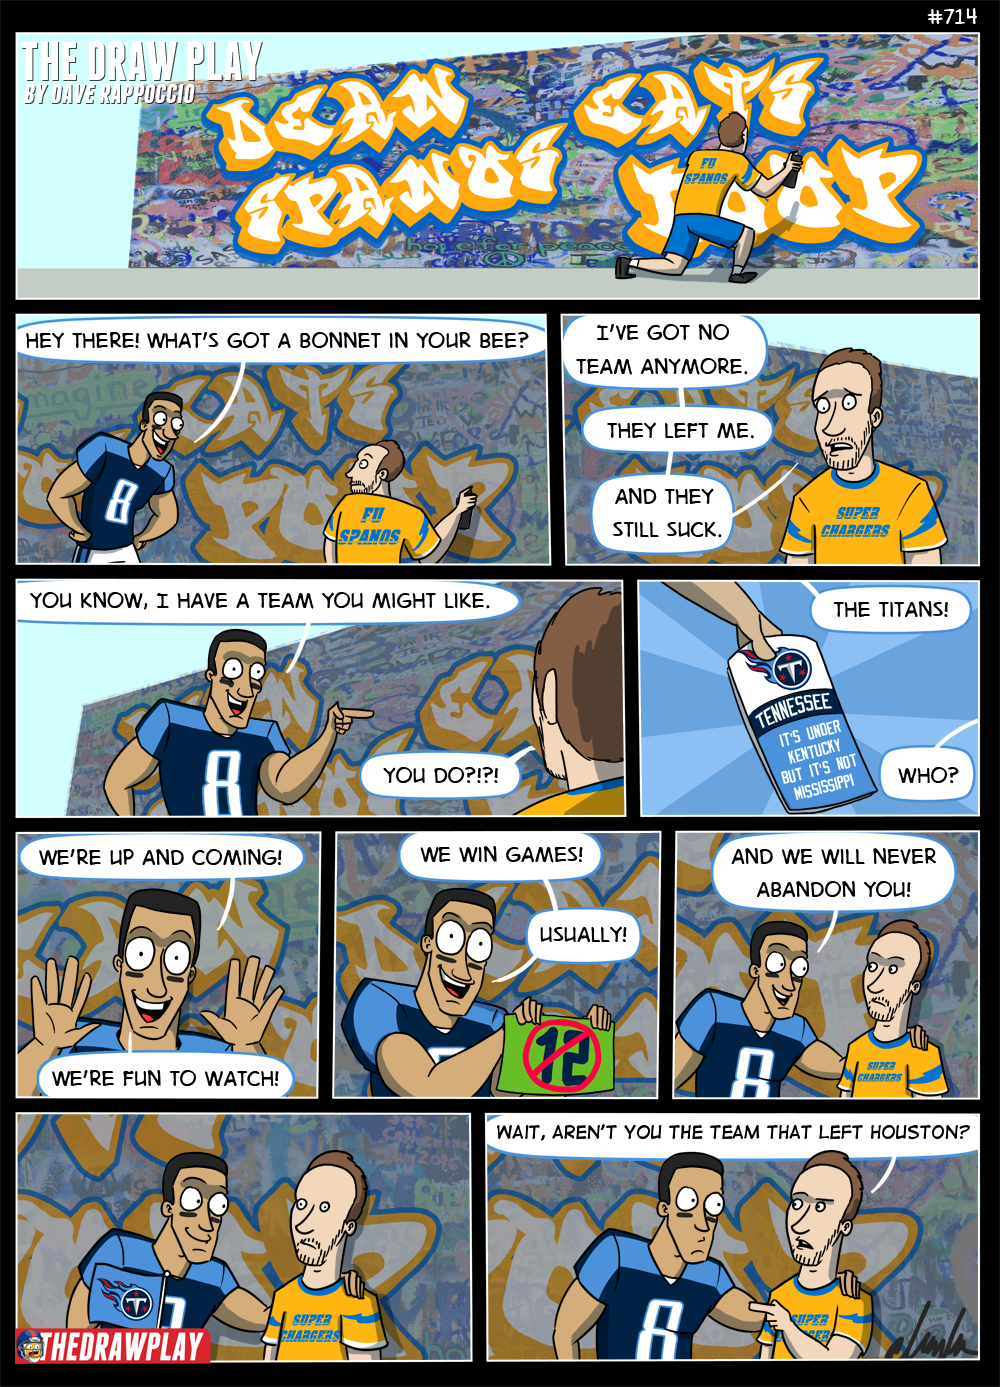 Dean Spanos would eat the poop than move it to a new toilet that already had poop and didn't want Dean's poop, and then Dean would complain that no one wants his poop this metaphor really got away from me